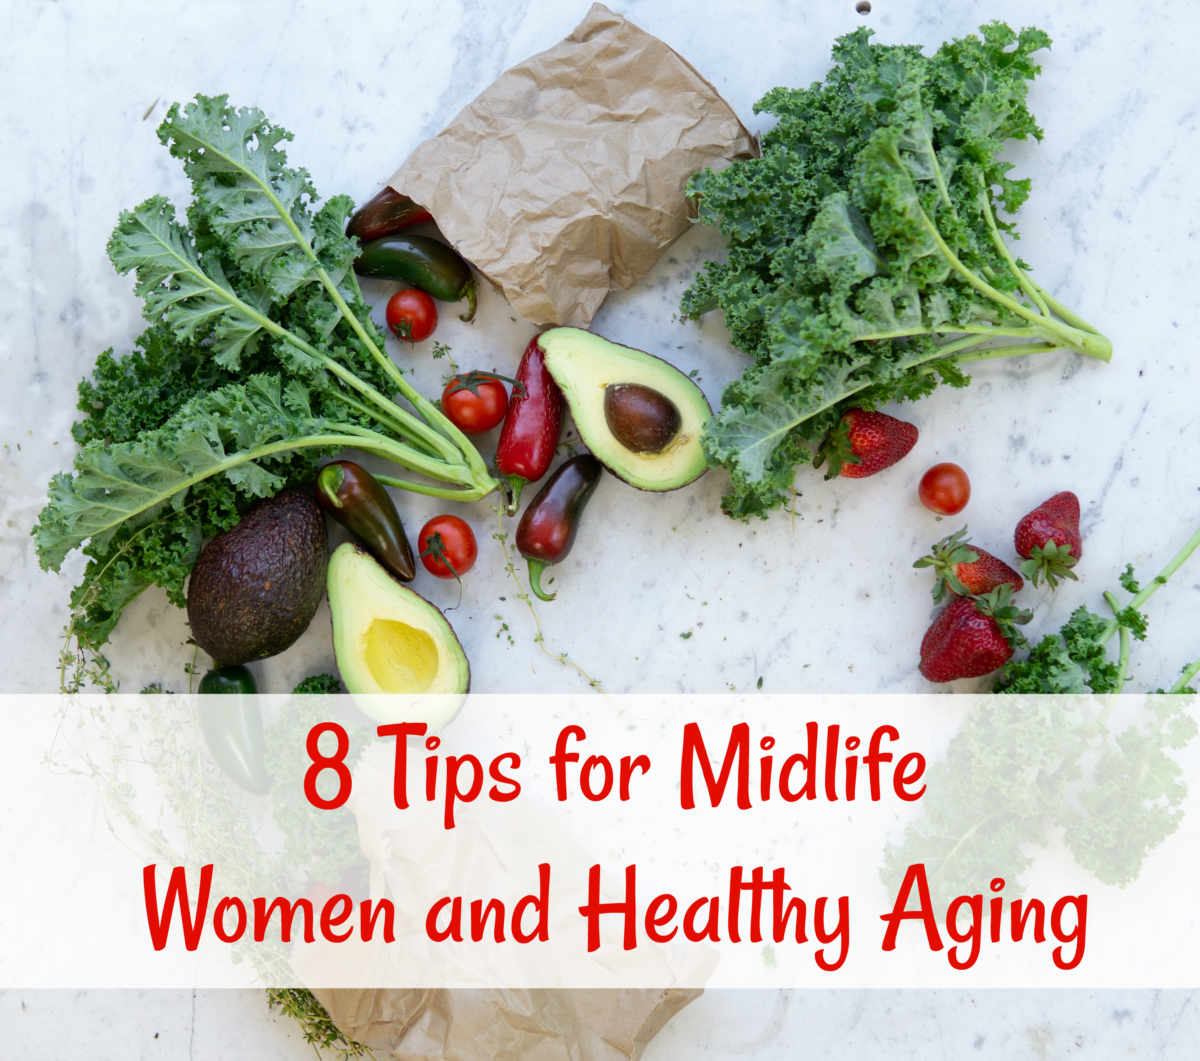 8 Tips for Midlife Women and Healthy Aging